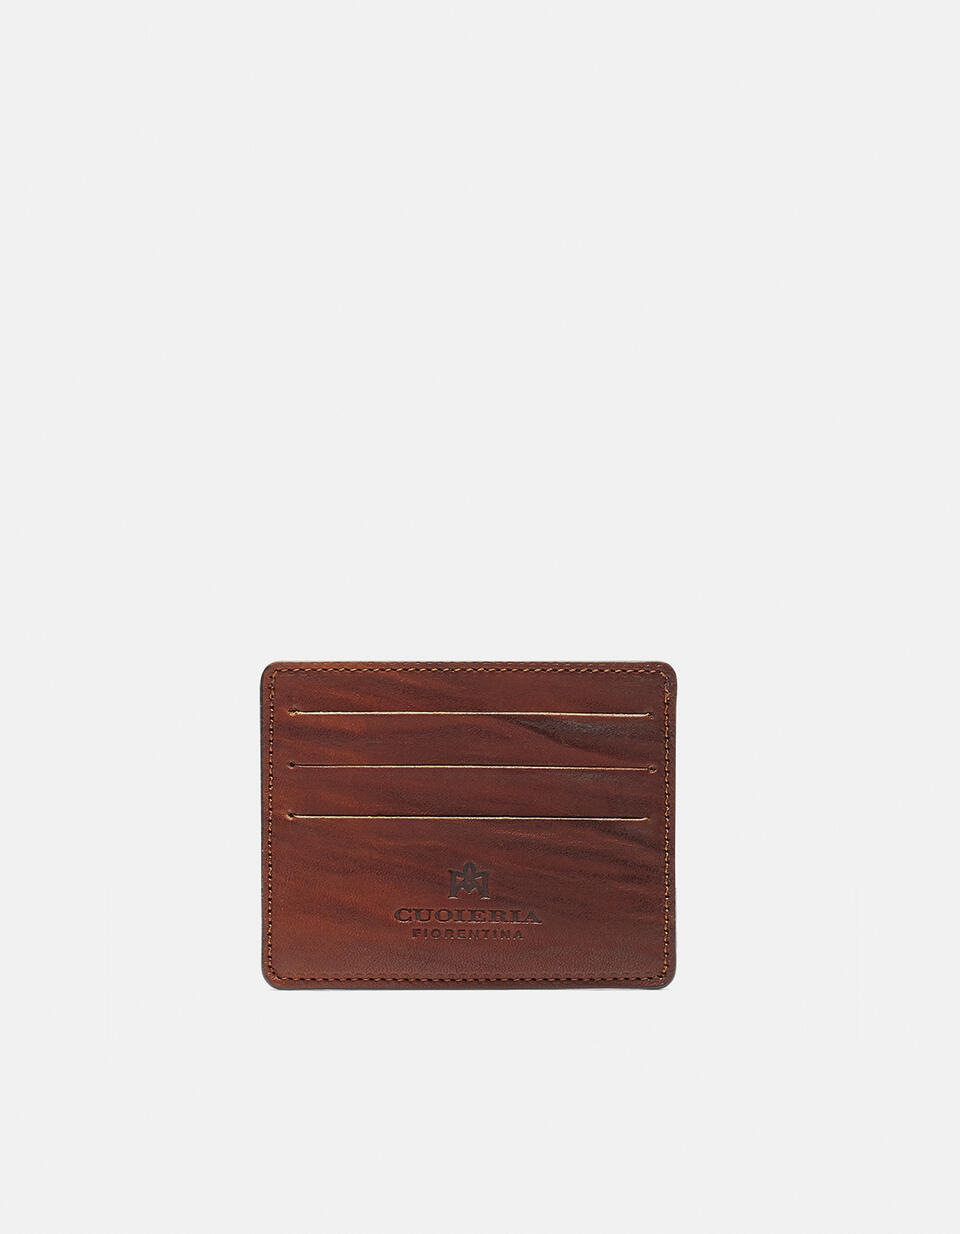 Bourbon credit card holder with banknote holder opening - Card Holders - Men's Wallets | Wallets  - Card Holders - Men's Wallets | WalletsCuoieria Fiorentina